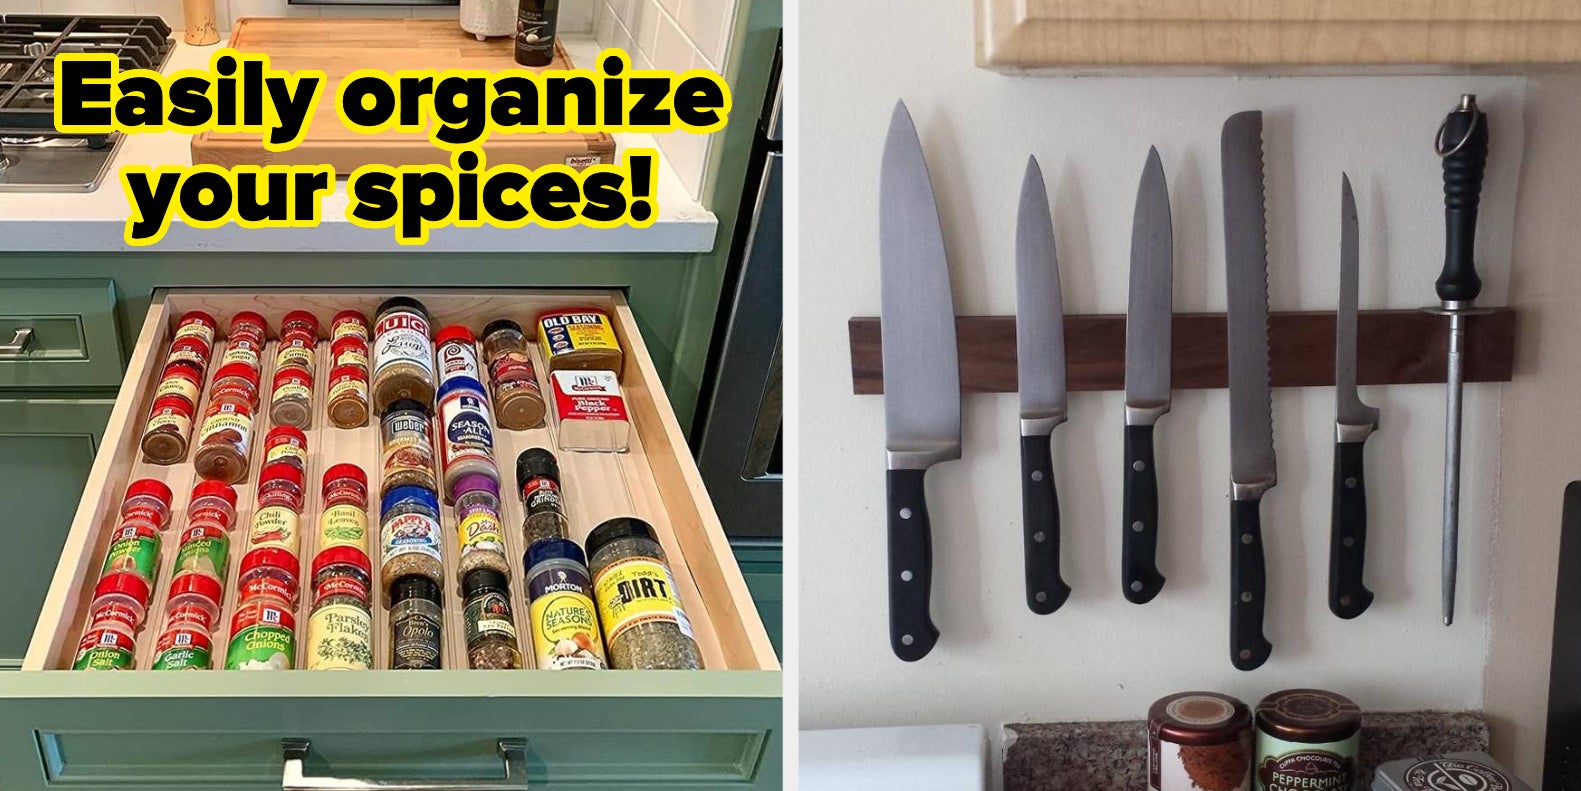 Downsized Kitchens: 3 Space-Saving Measuring Tools